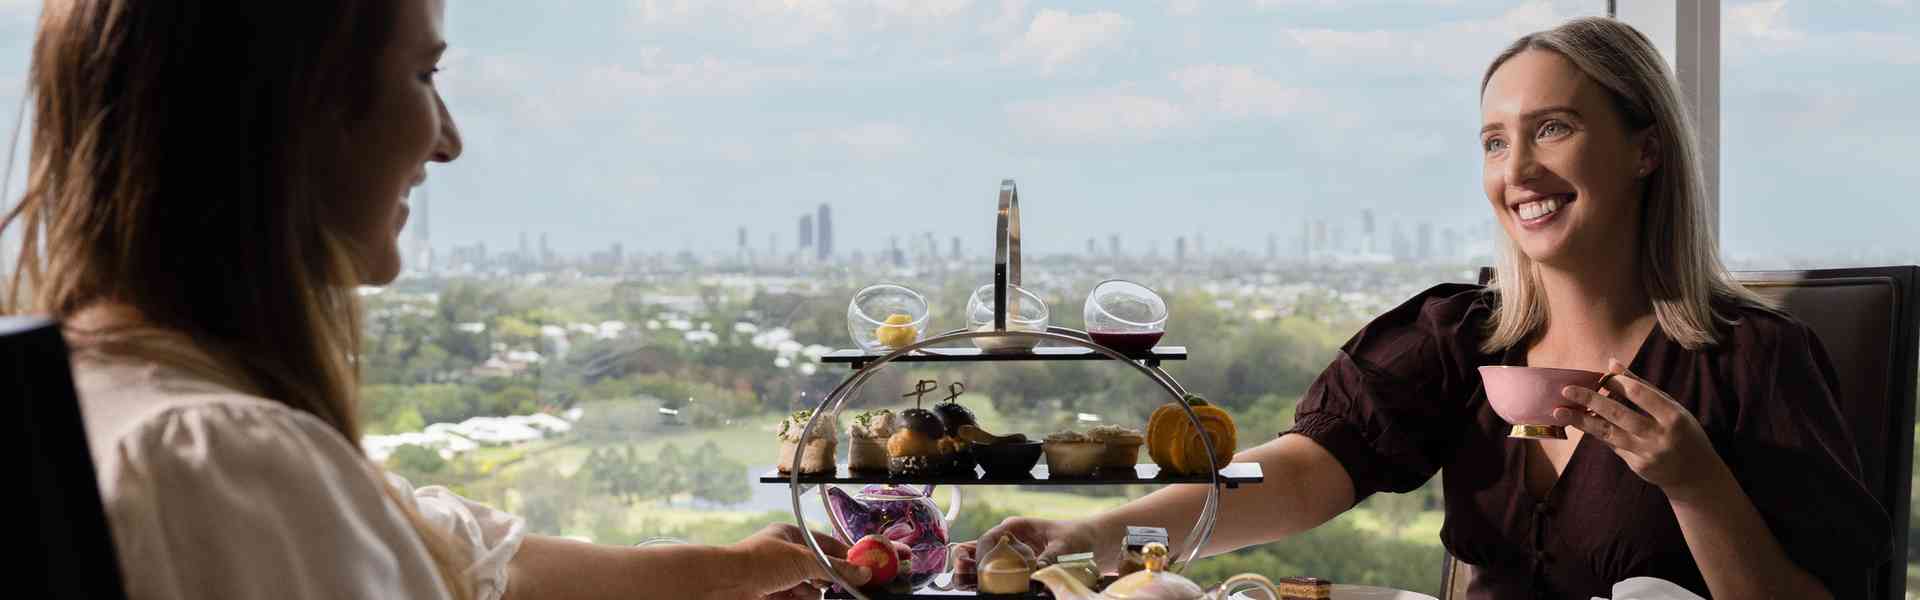 10 Top Spots For High Tea On The Gold Coast